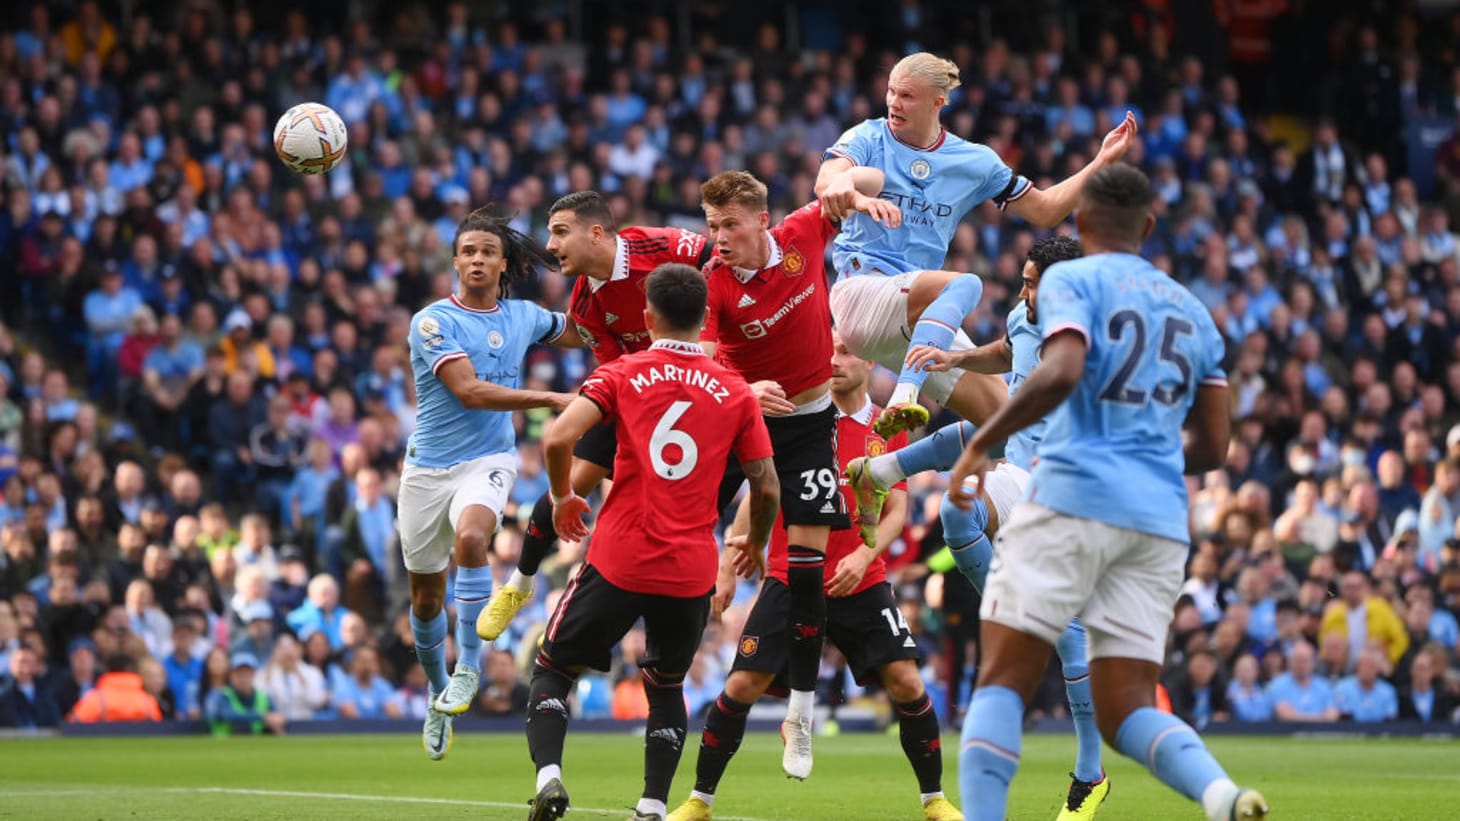 FA Cup 2022-23 final: Manchester City vs Manchester United, watch live  streaming and telecast in India